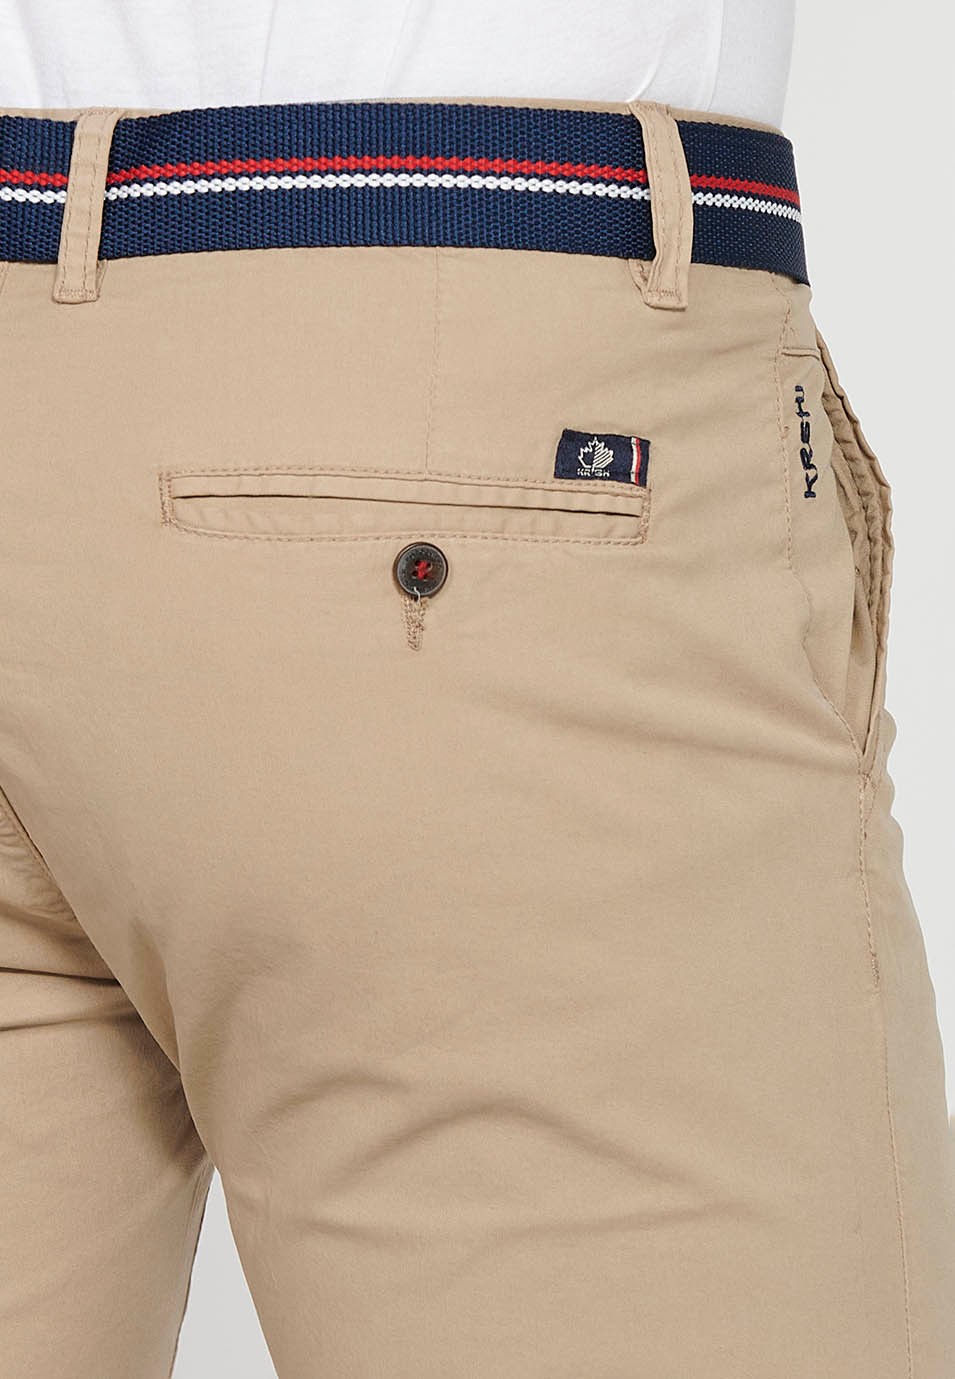 Shorts with a turn-up finish with front closure with zipper and button and belt in Beige Color for Men 5